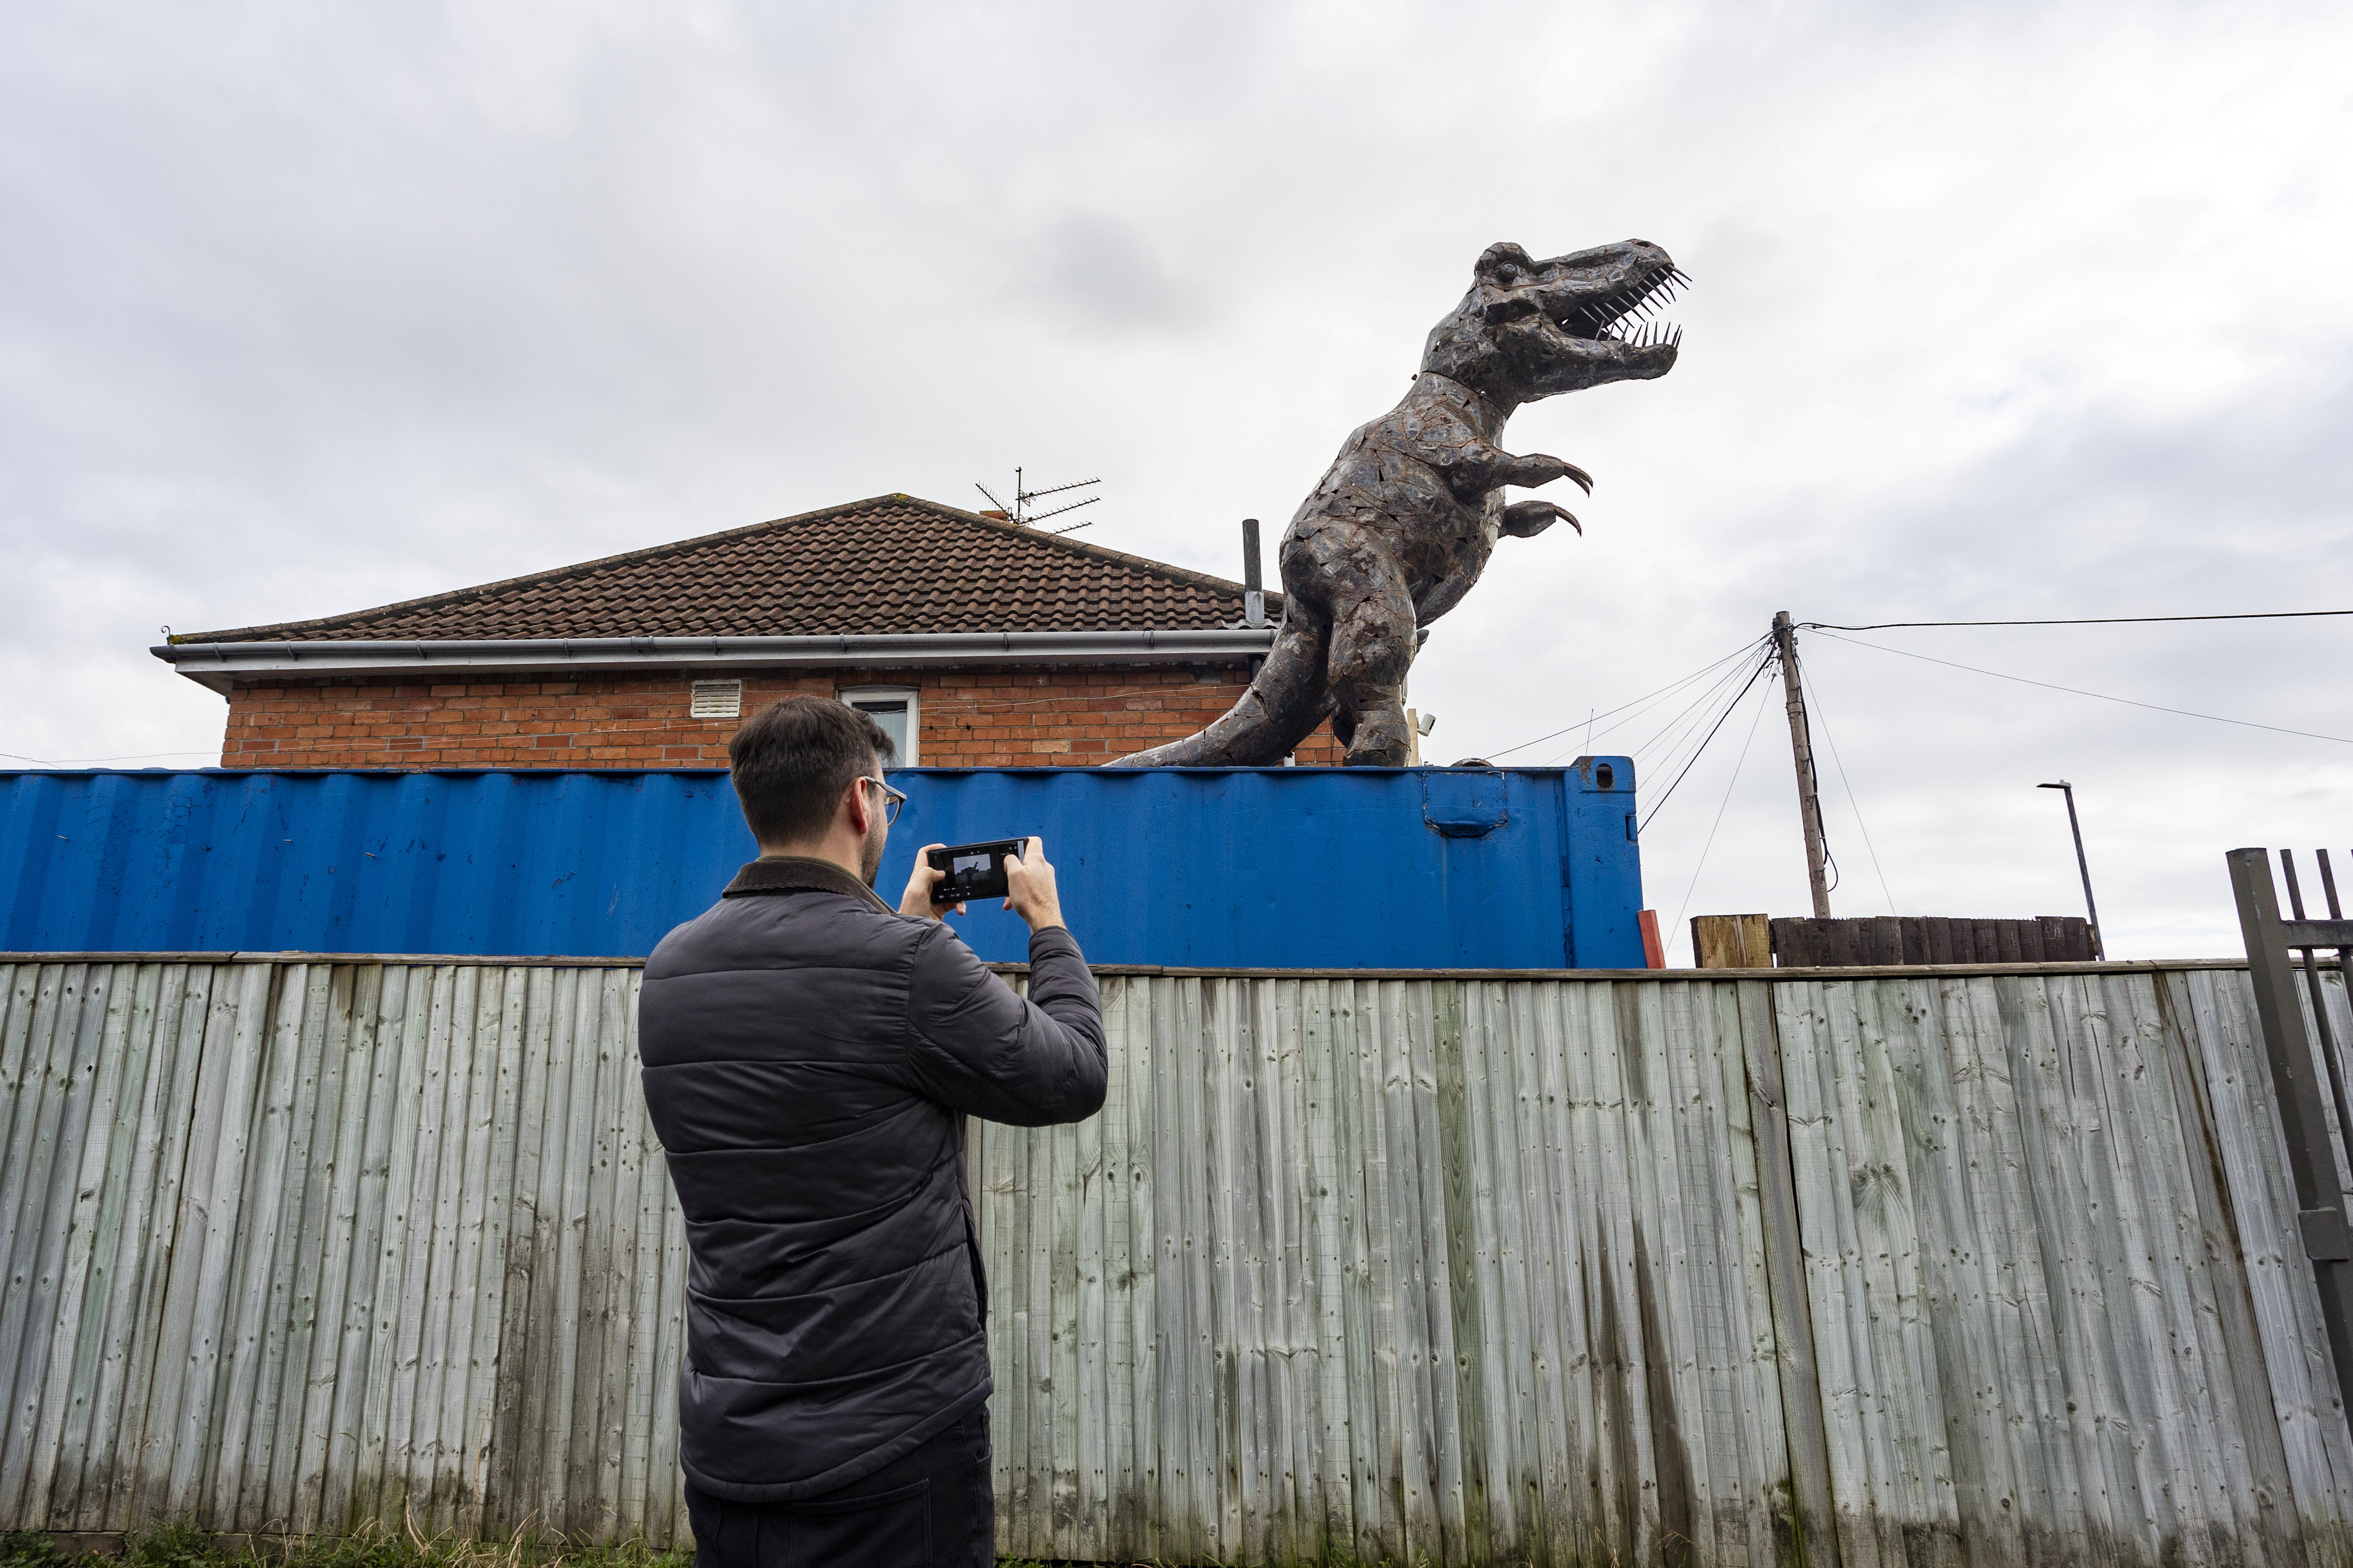 One local snaps the dino sculpture